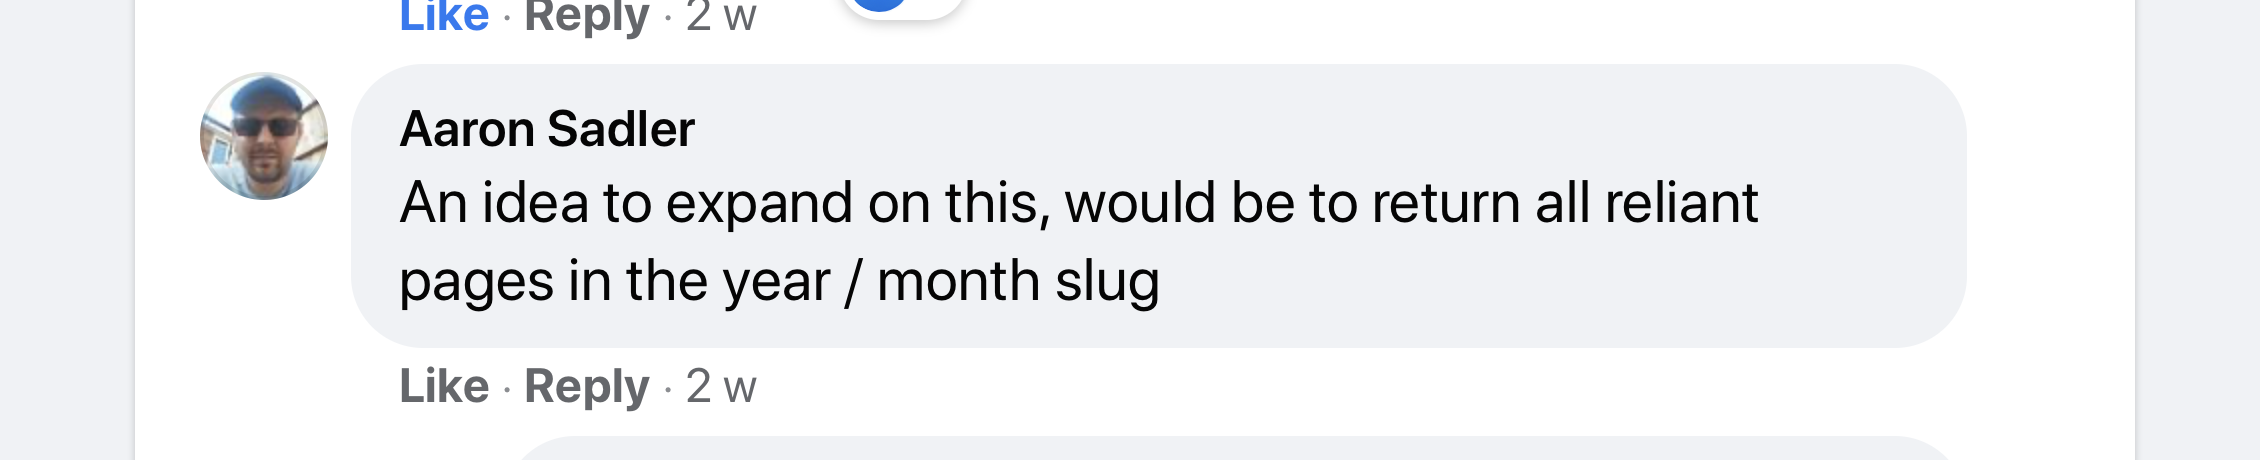 Aaron Sadler on Facebook writing 'An idea to expand on this, would be to return all reliant pages in the year / month slug'